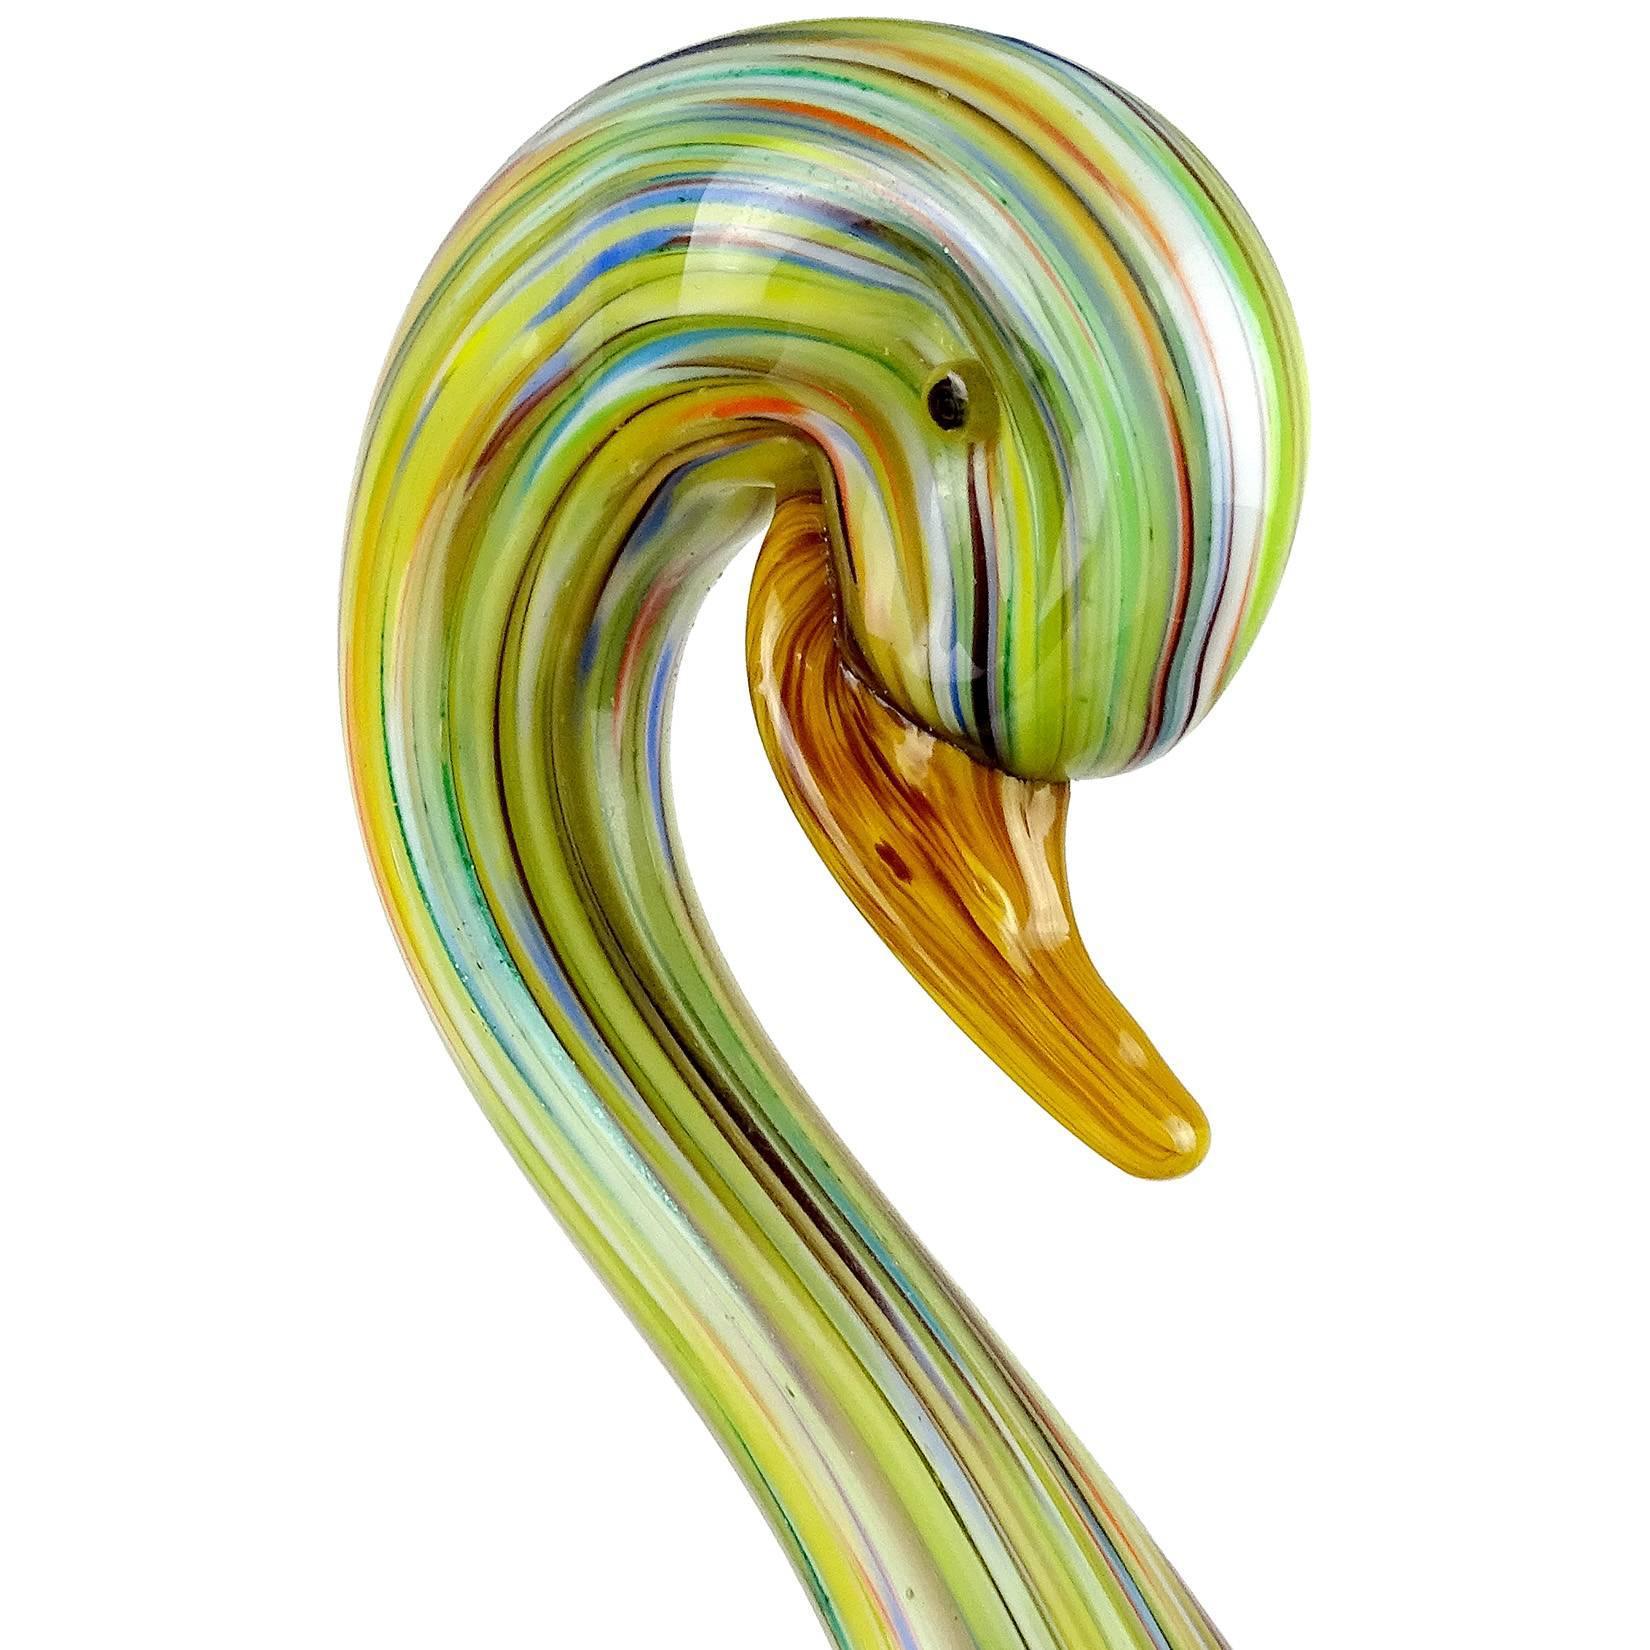 Colorful vintage Murano hand blown pulled feather Italian art glass swan bird sculpture / figure. Documented to Galliano Ferro for the Fornasa De Murano A L'Insegna Del Moreto Company, with label attached. The bird is made with many different bright